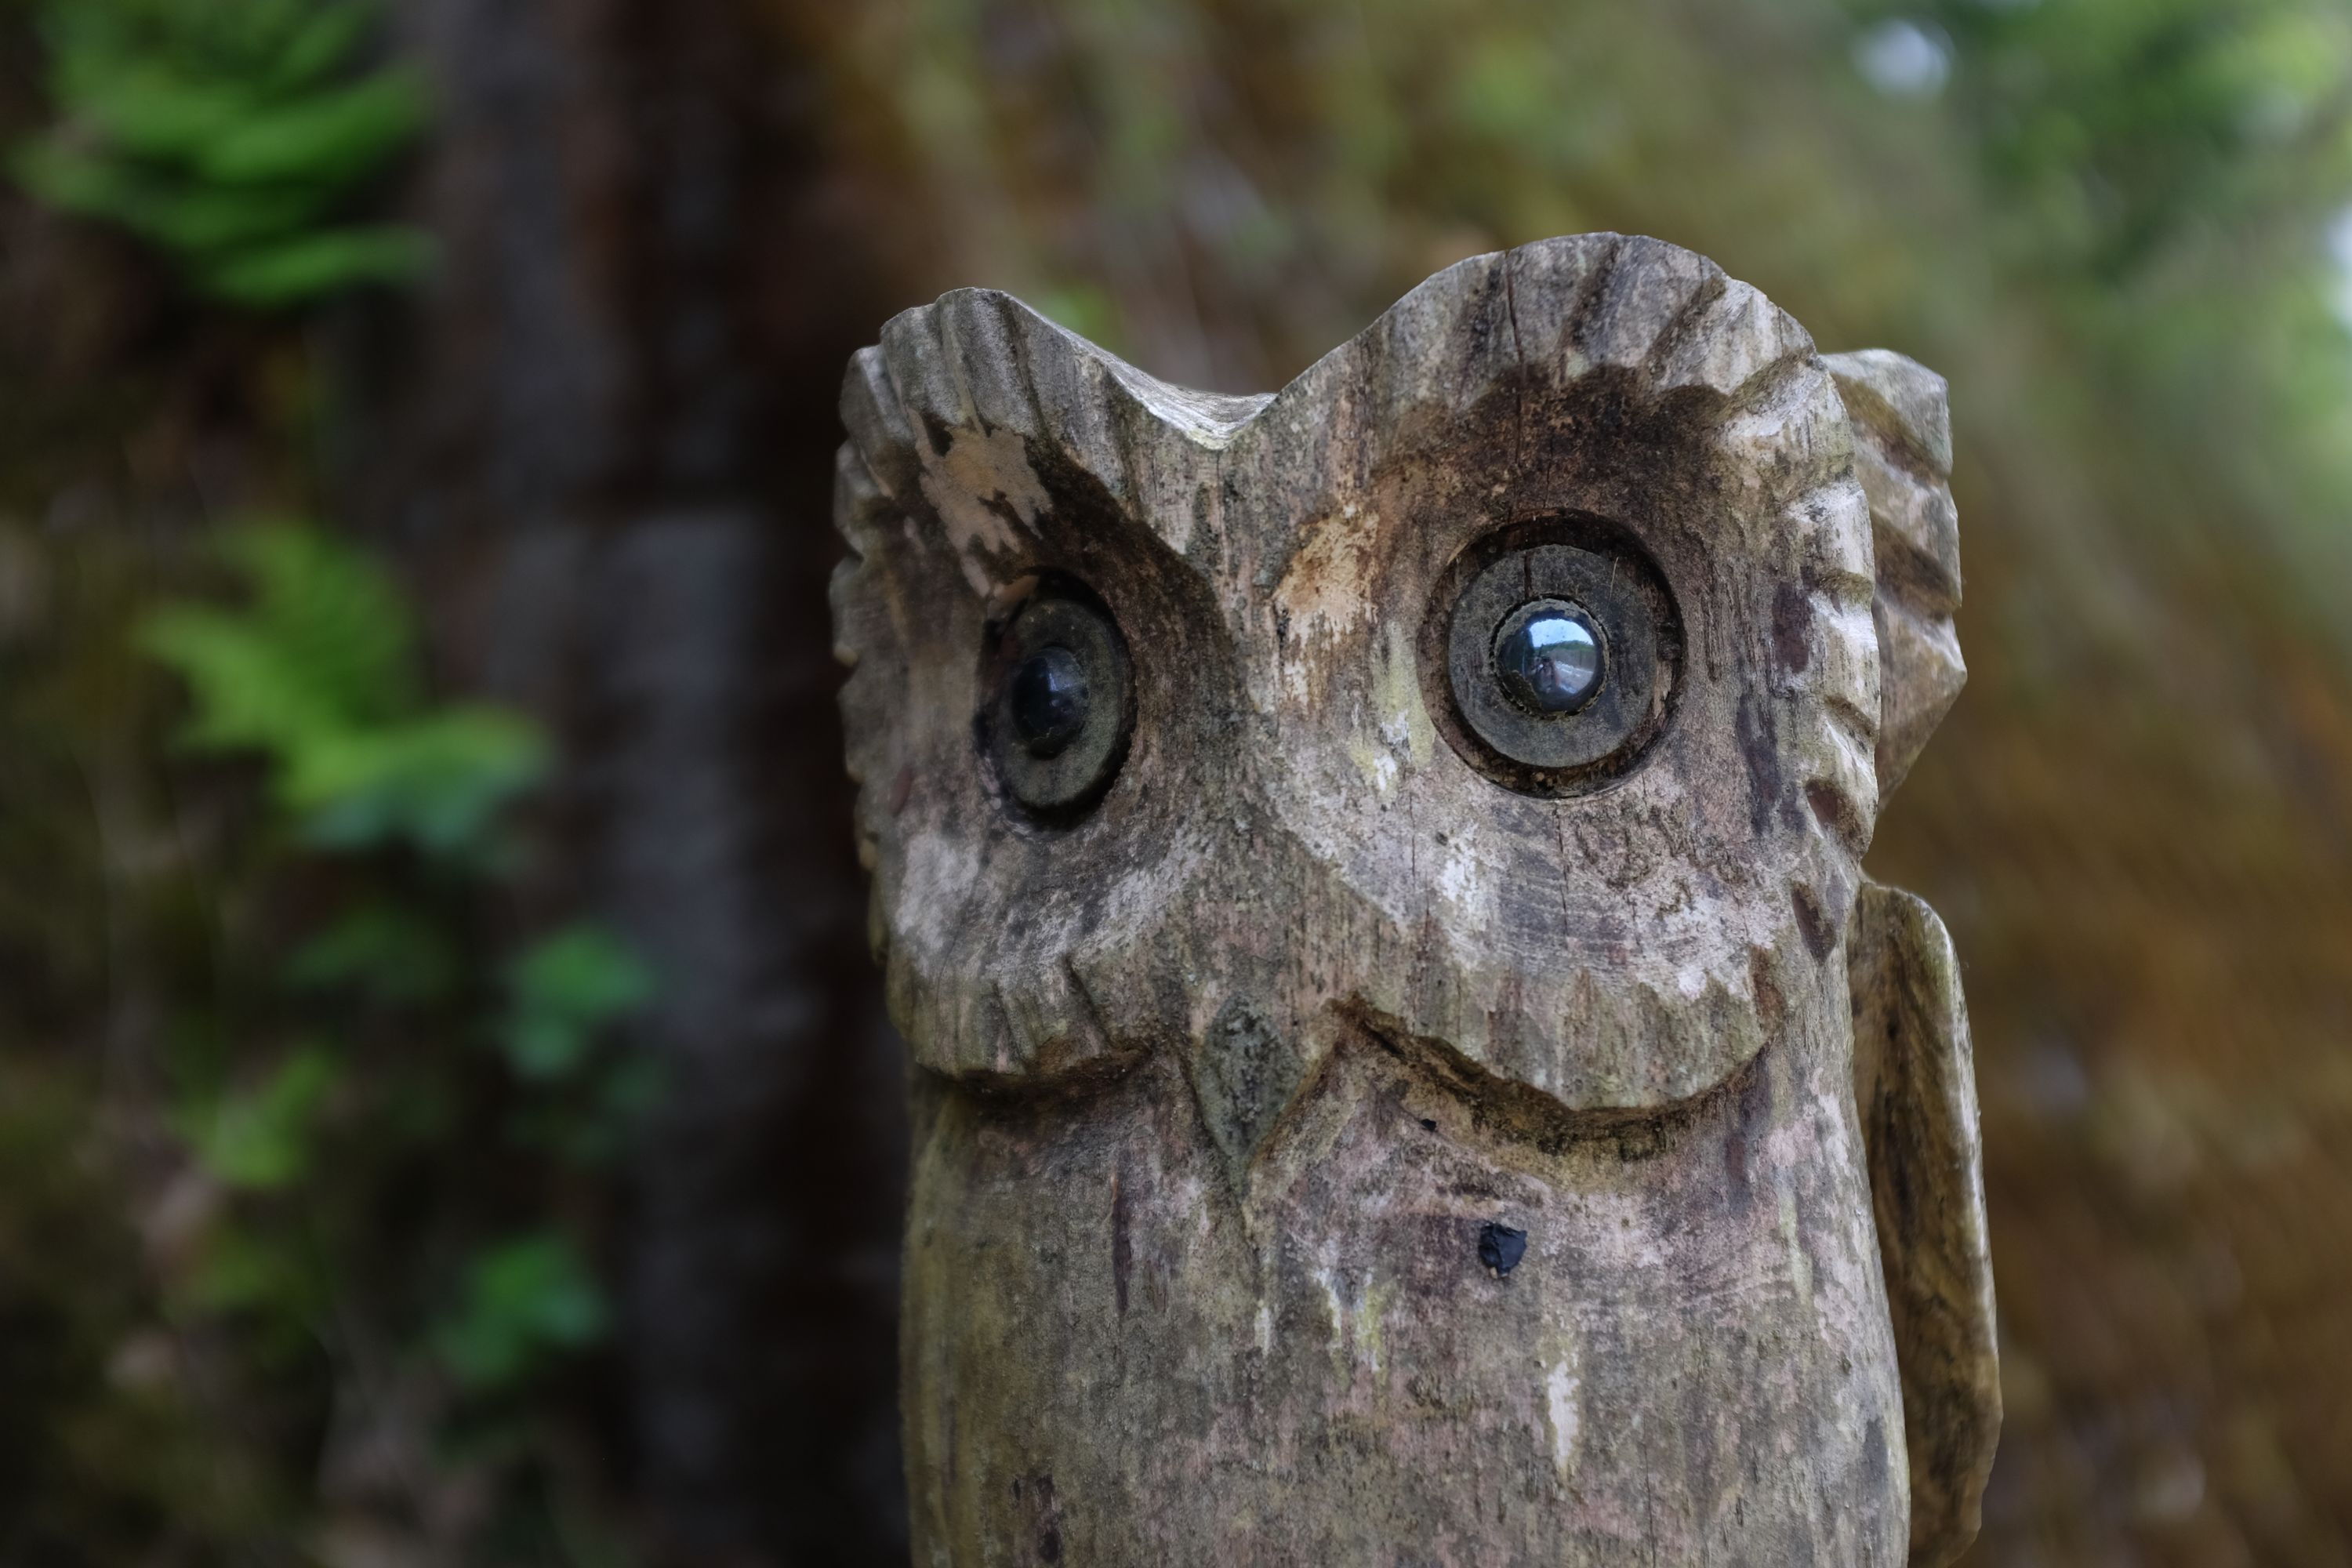 A closeup of the head of a carved wooden owl.